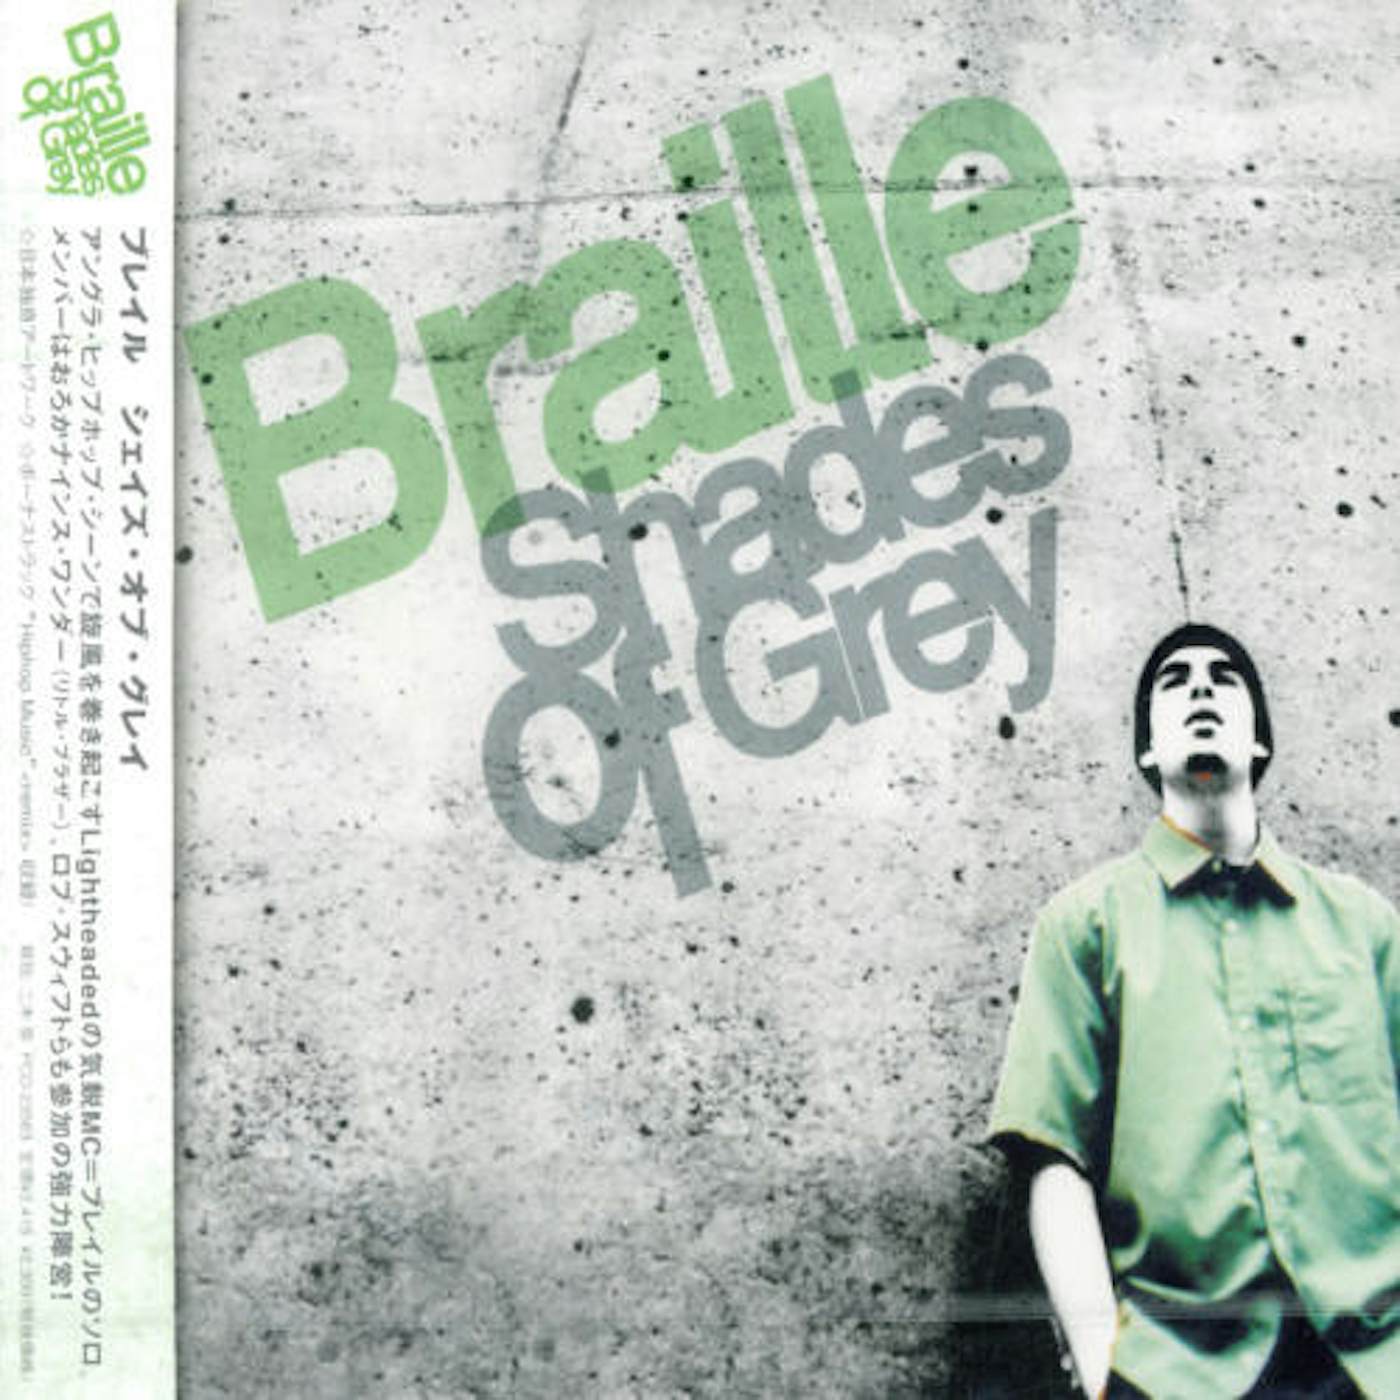 Braille SHADES OF GREY CD